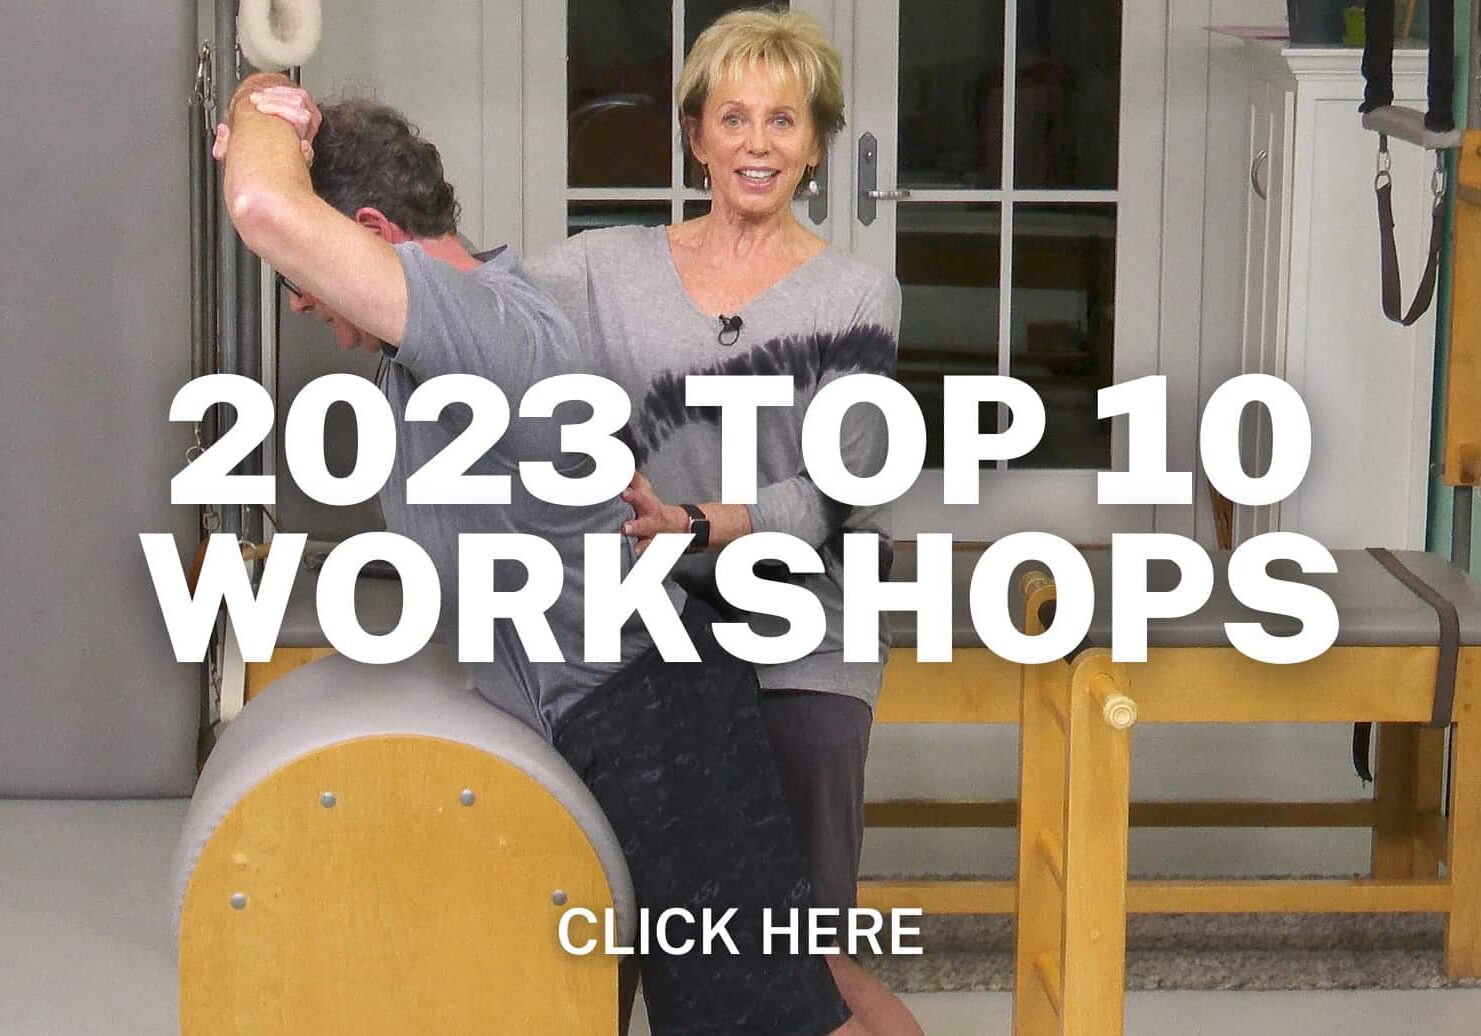 click here for 2023 top 10 workshops